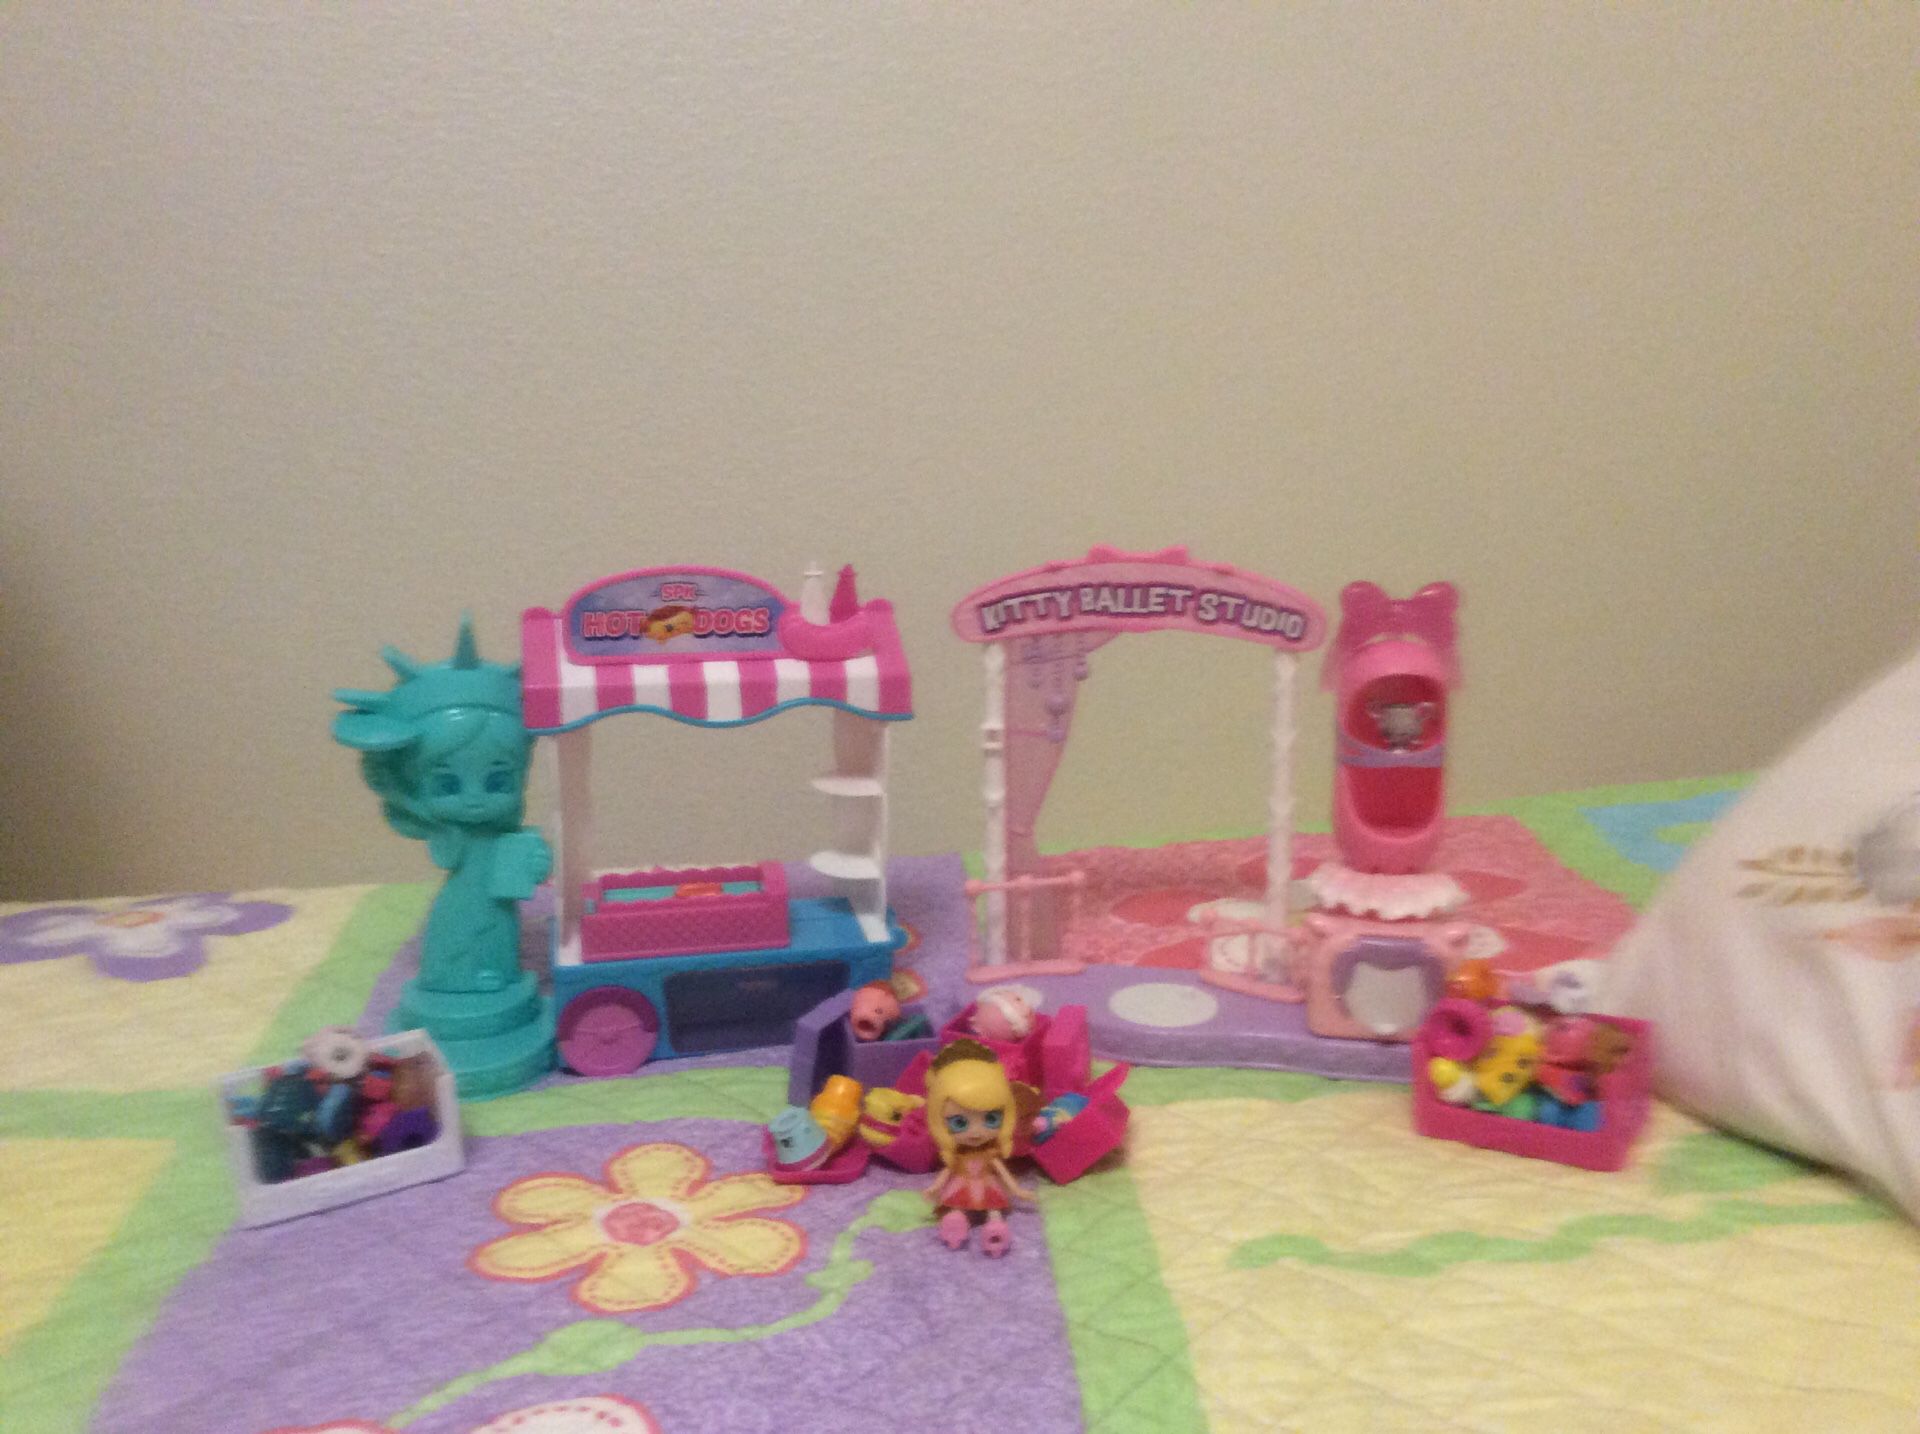 Shopkins toys all for $20